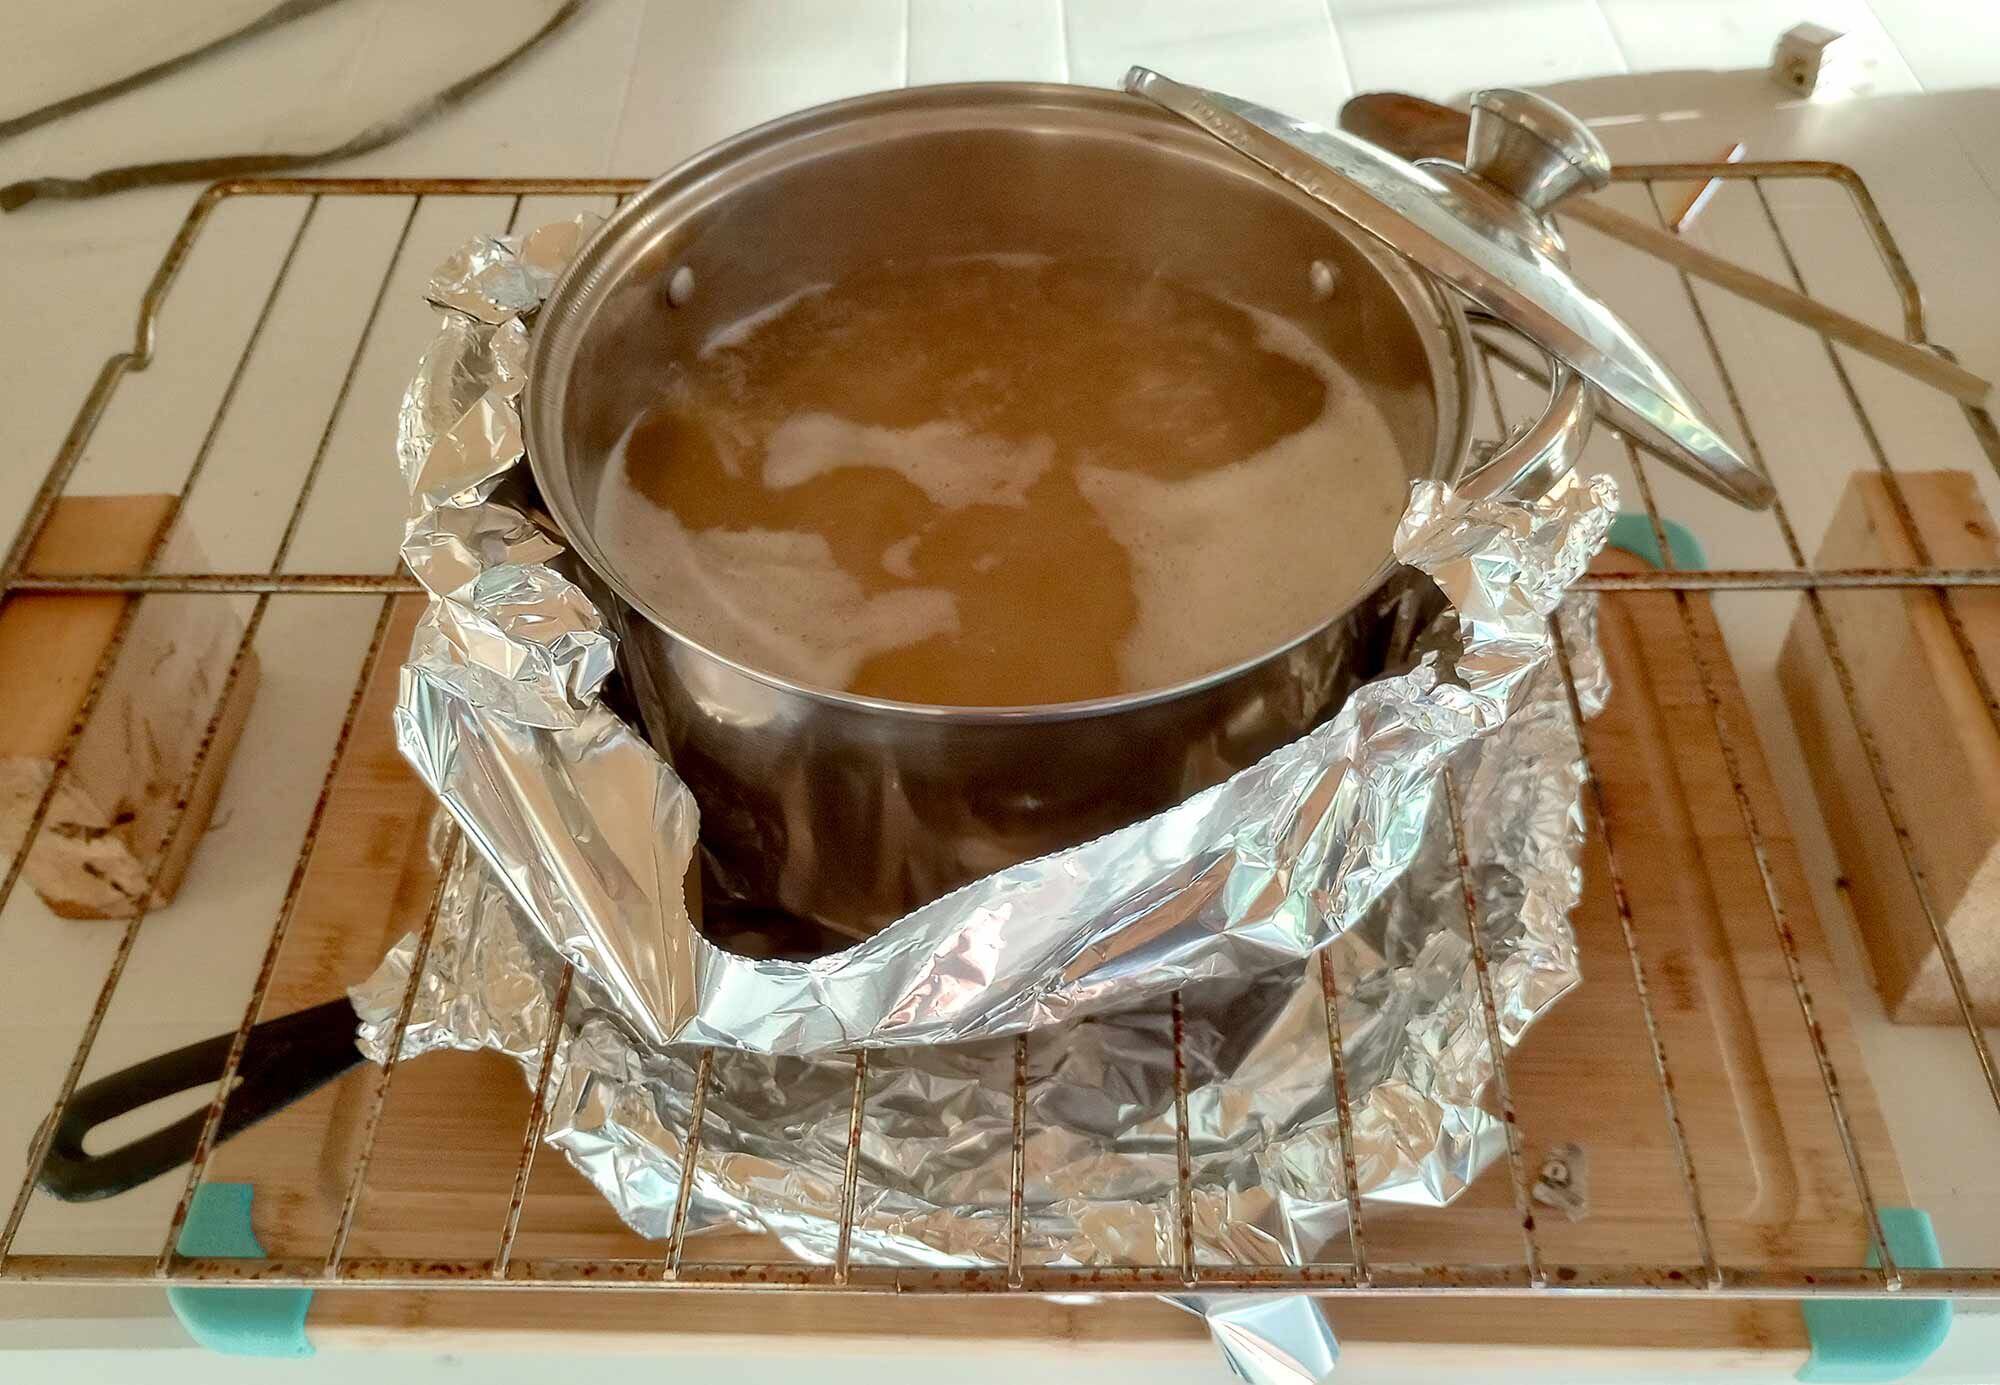 Pasta is boiled over a makeshift Sterno stovetop.